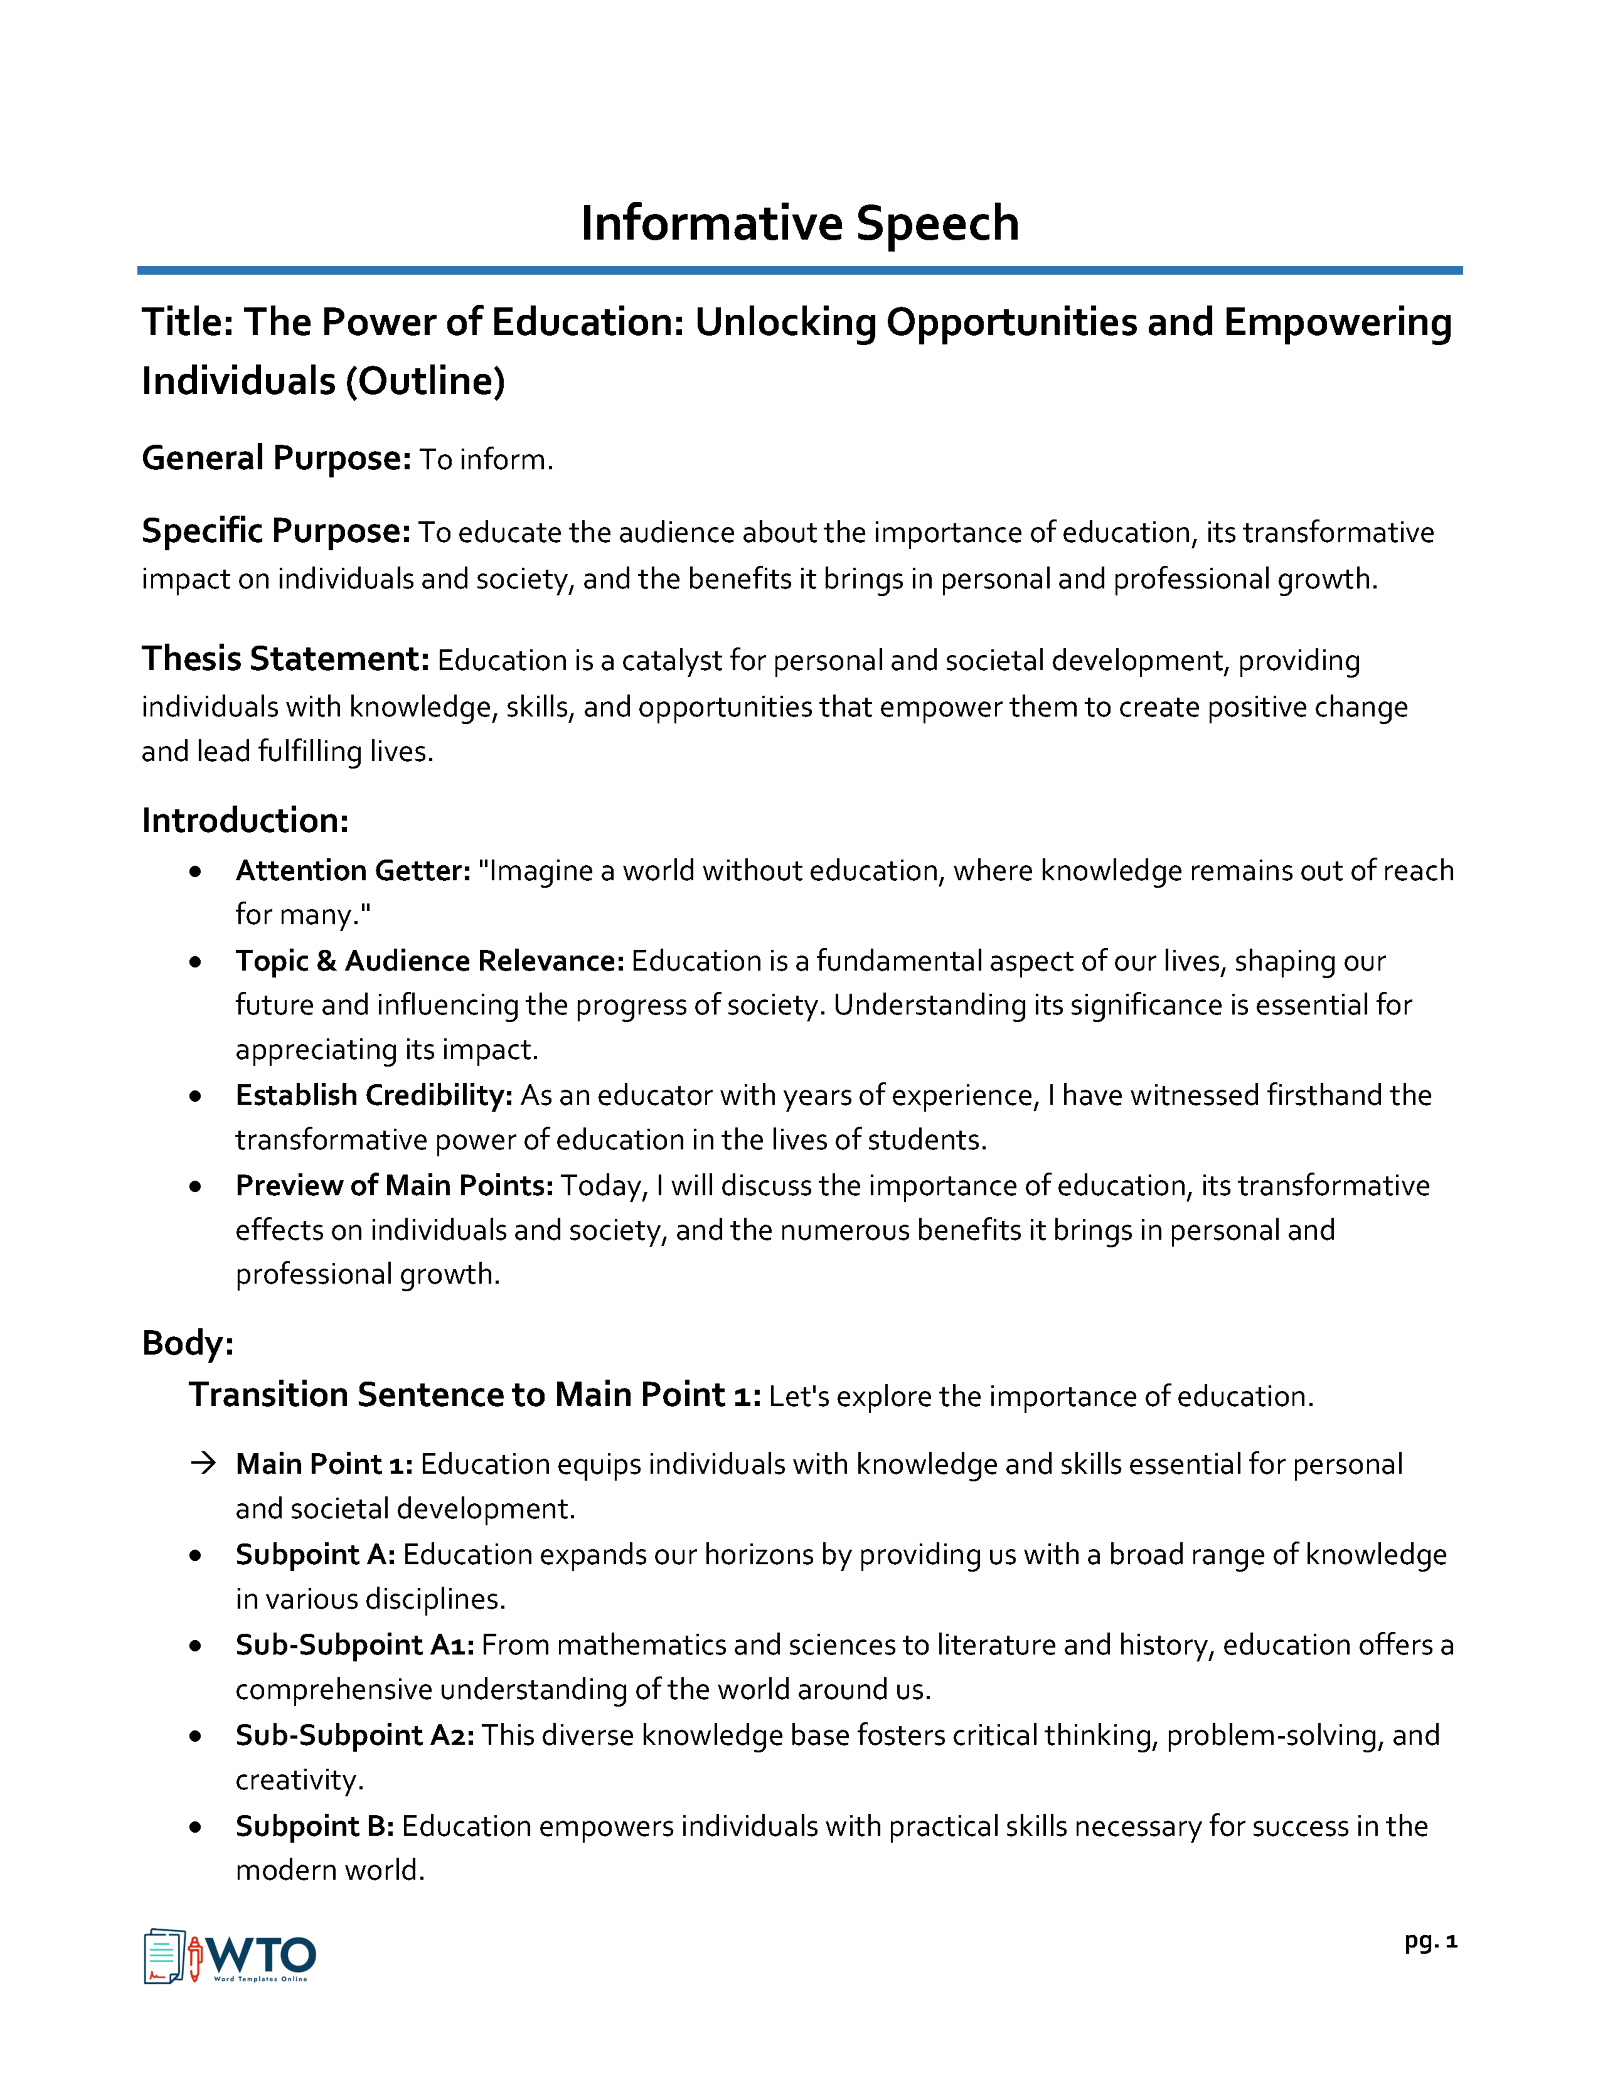 Great Comprehensive Unlocking Opportunities and Empowering Individuals by Education Speech Outline Example for Word File